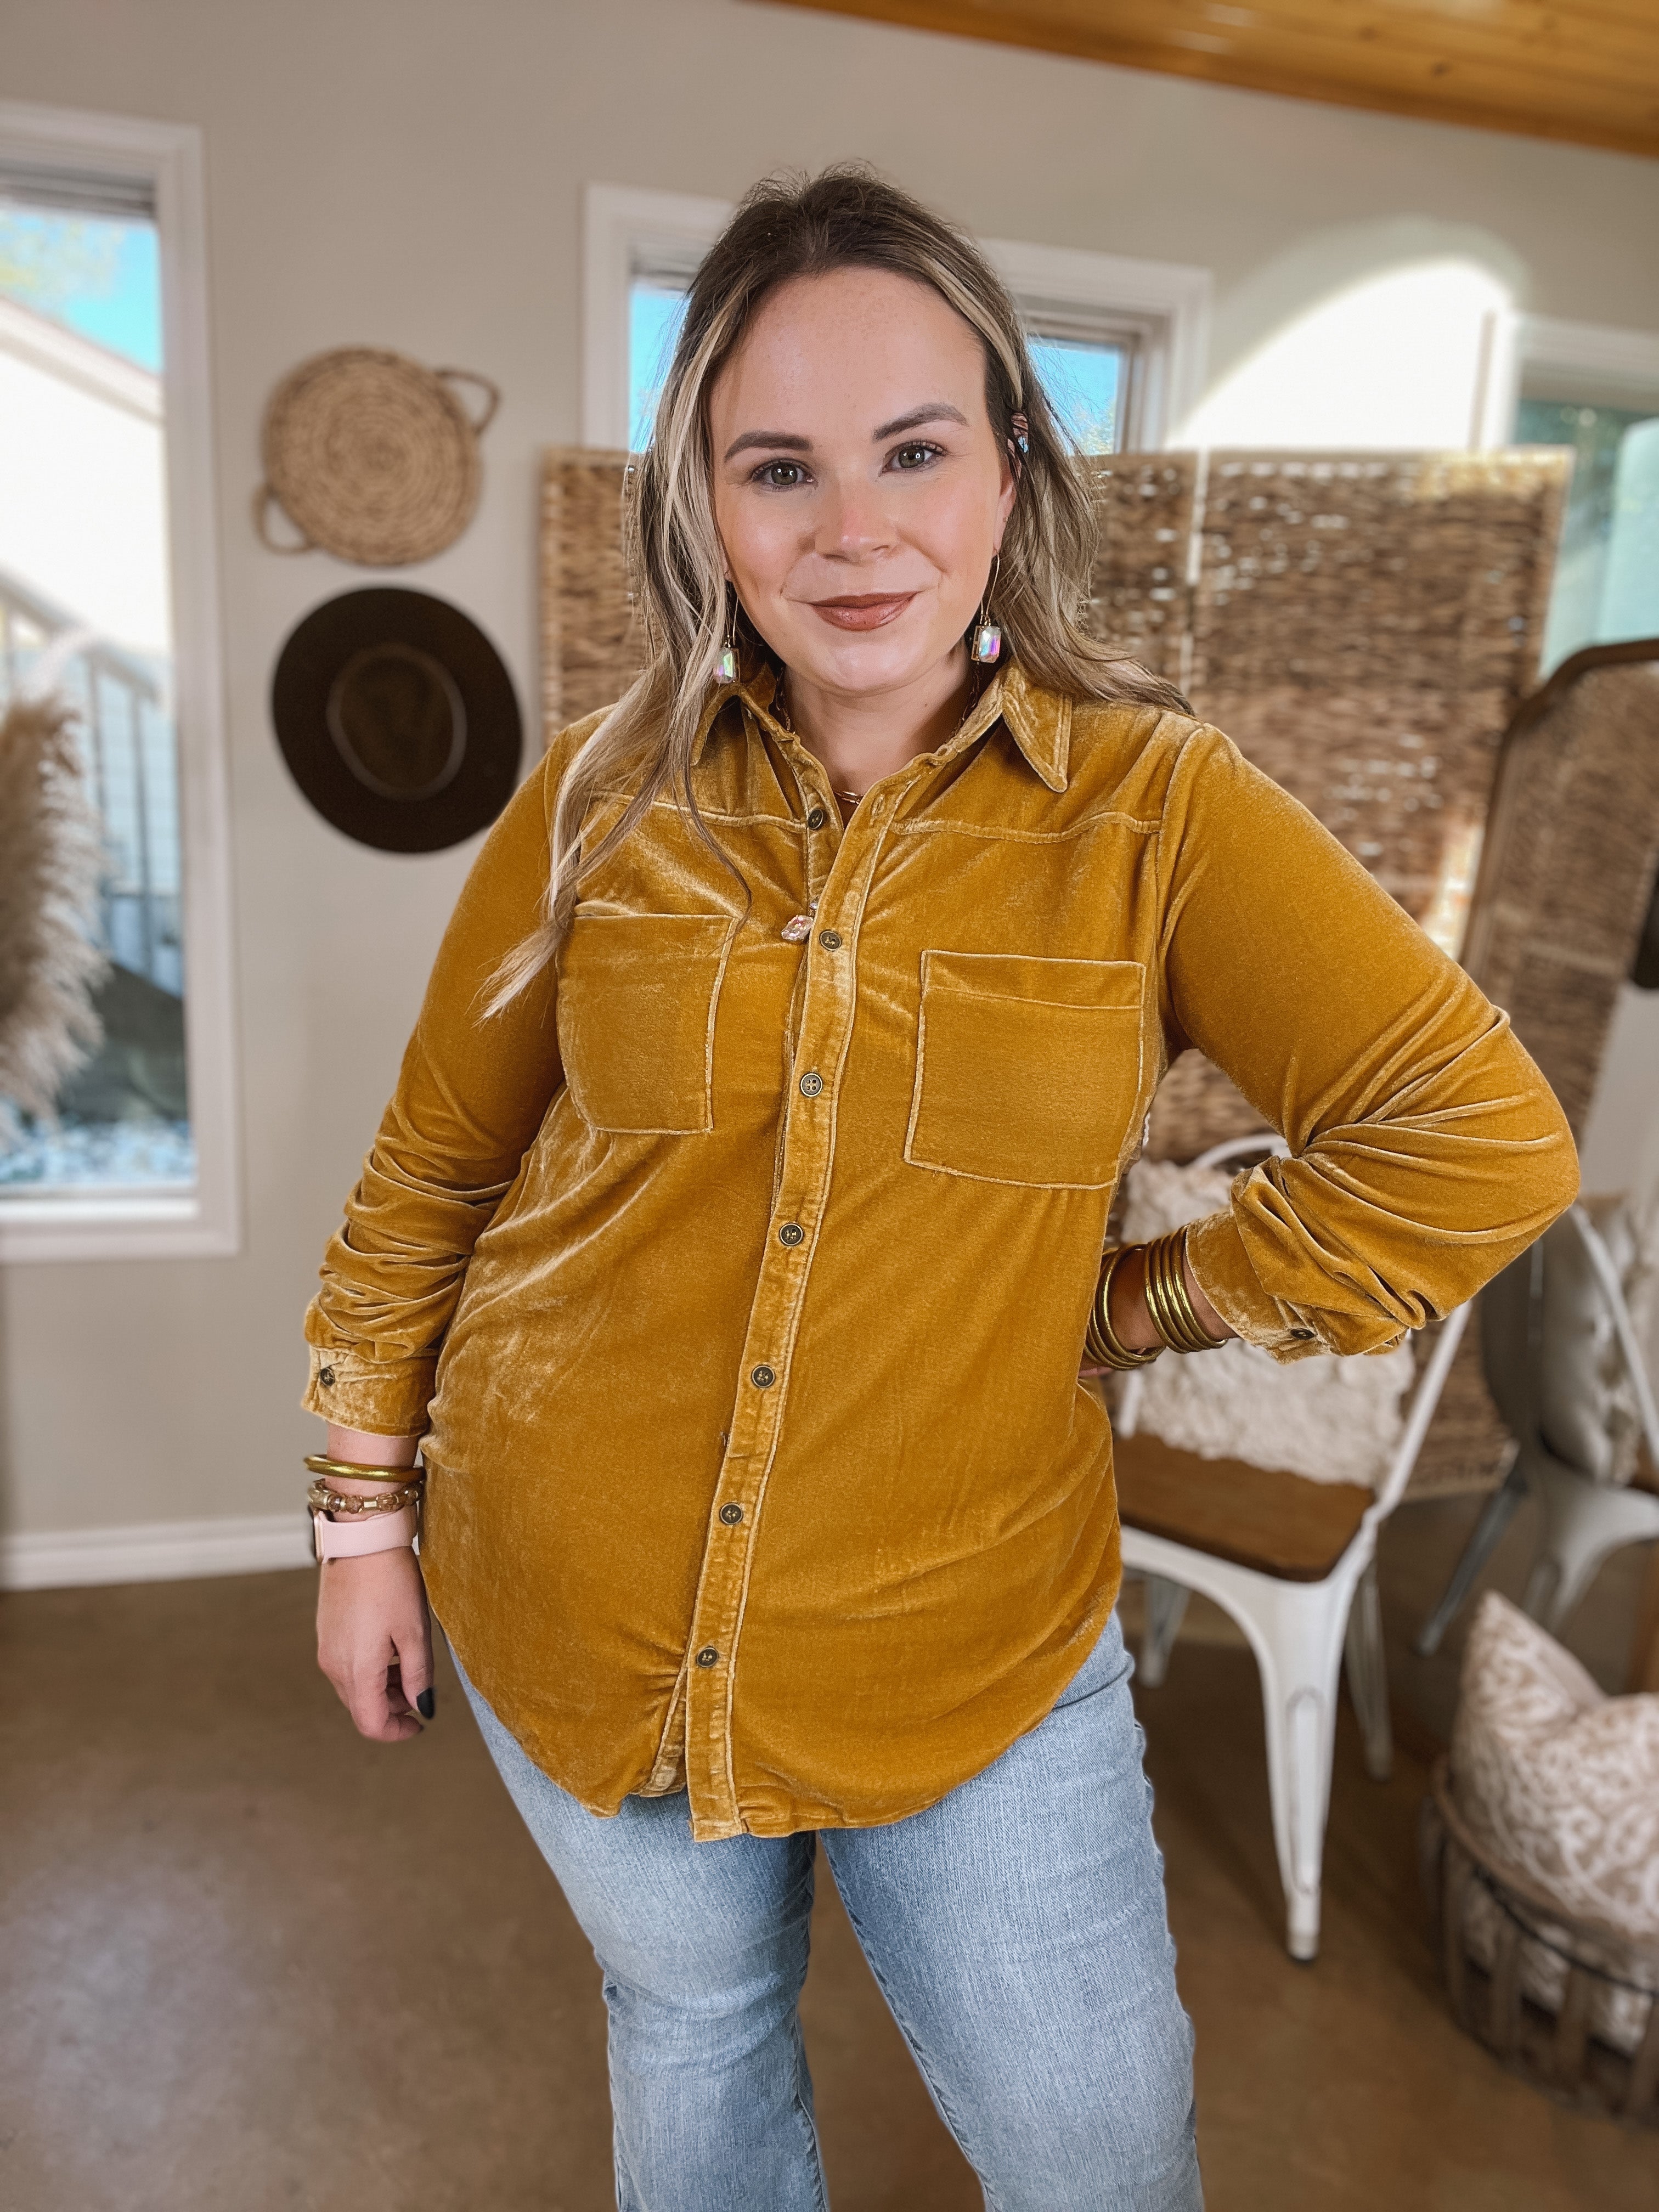 Candy Apple Evening Button Up Velvet Long Sleeve Blouse in Mustard - Giddy Up Glamour Boutique